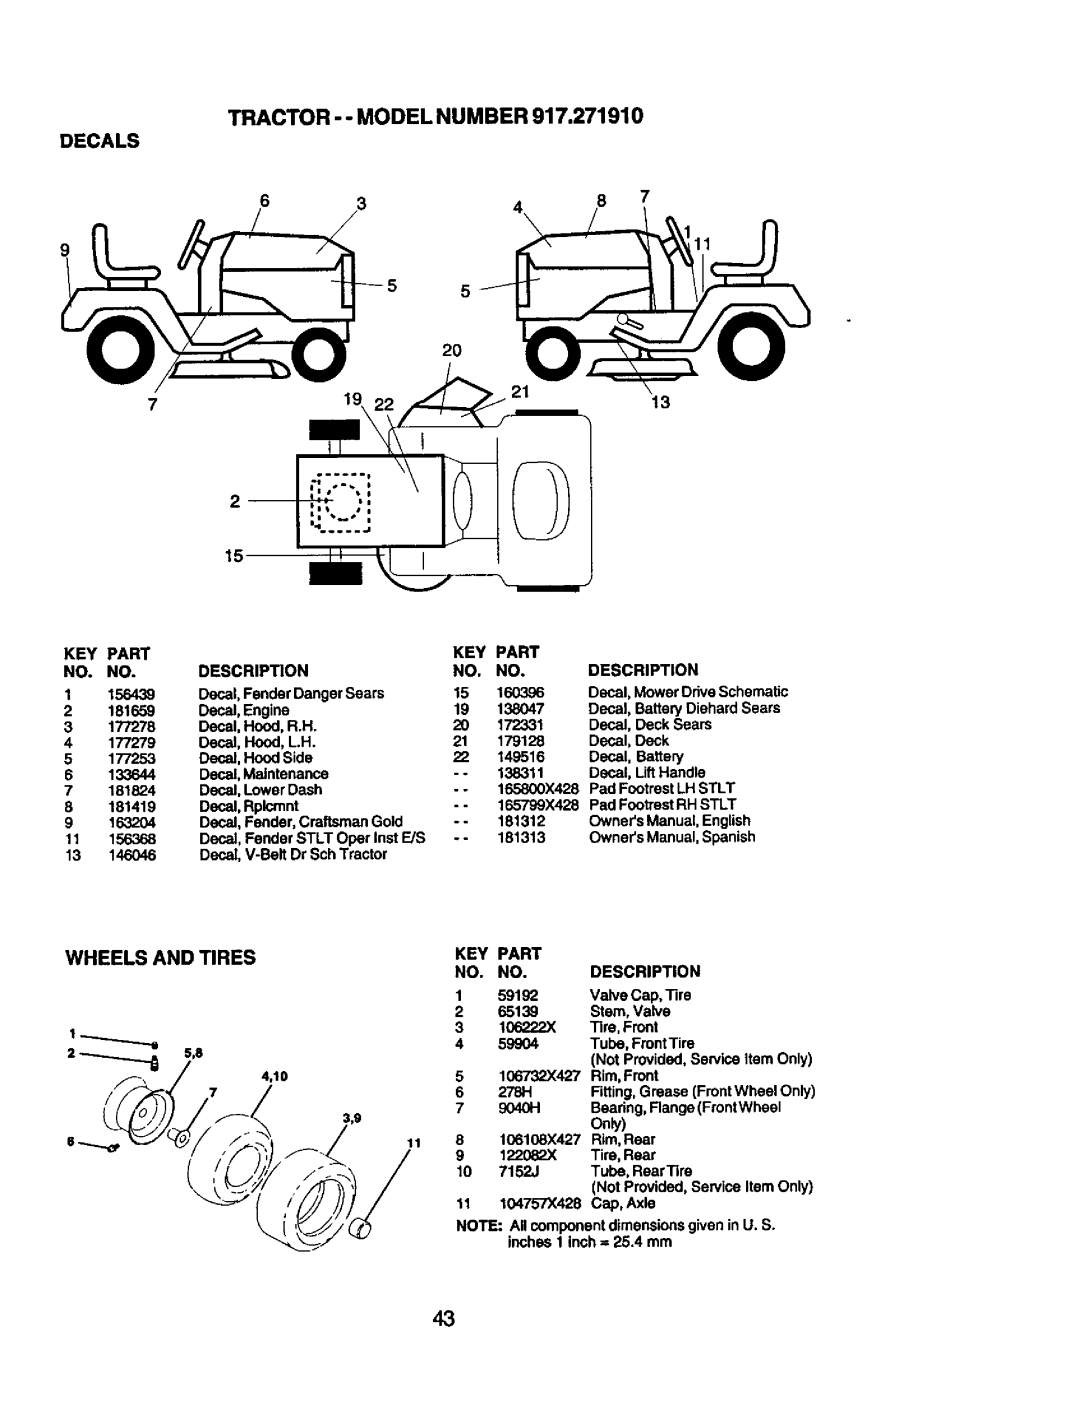 Craftsman 917.27191 owner manual Tractor - - Model Number, Wheels And Tires 